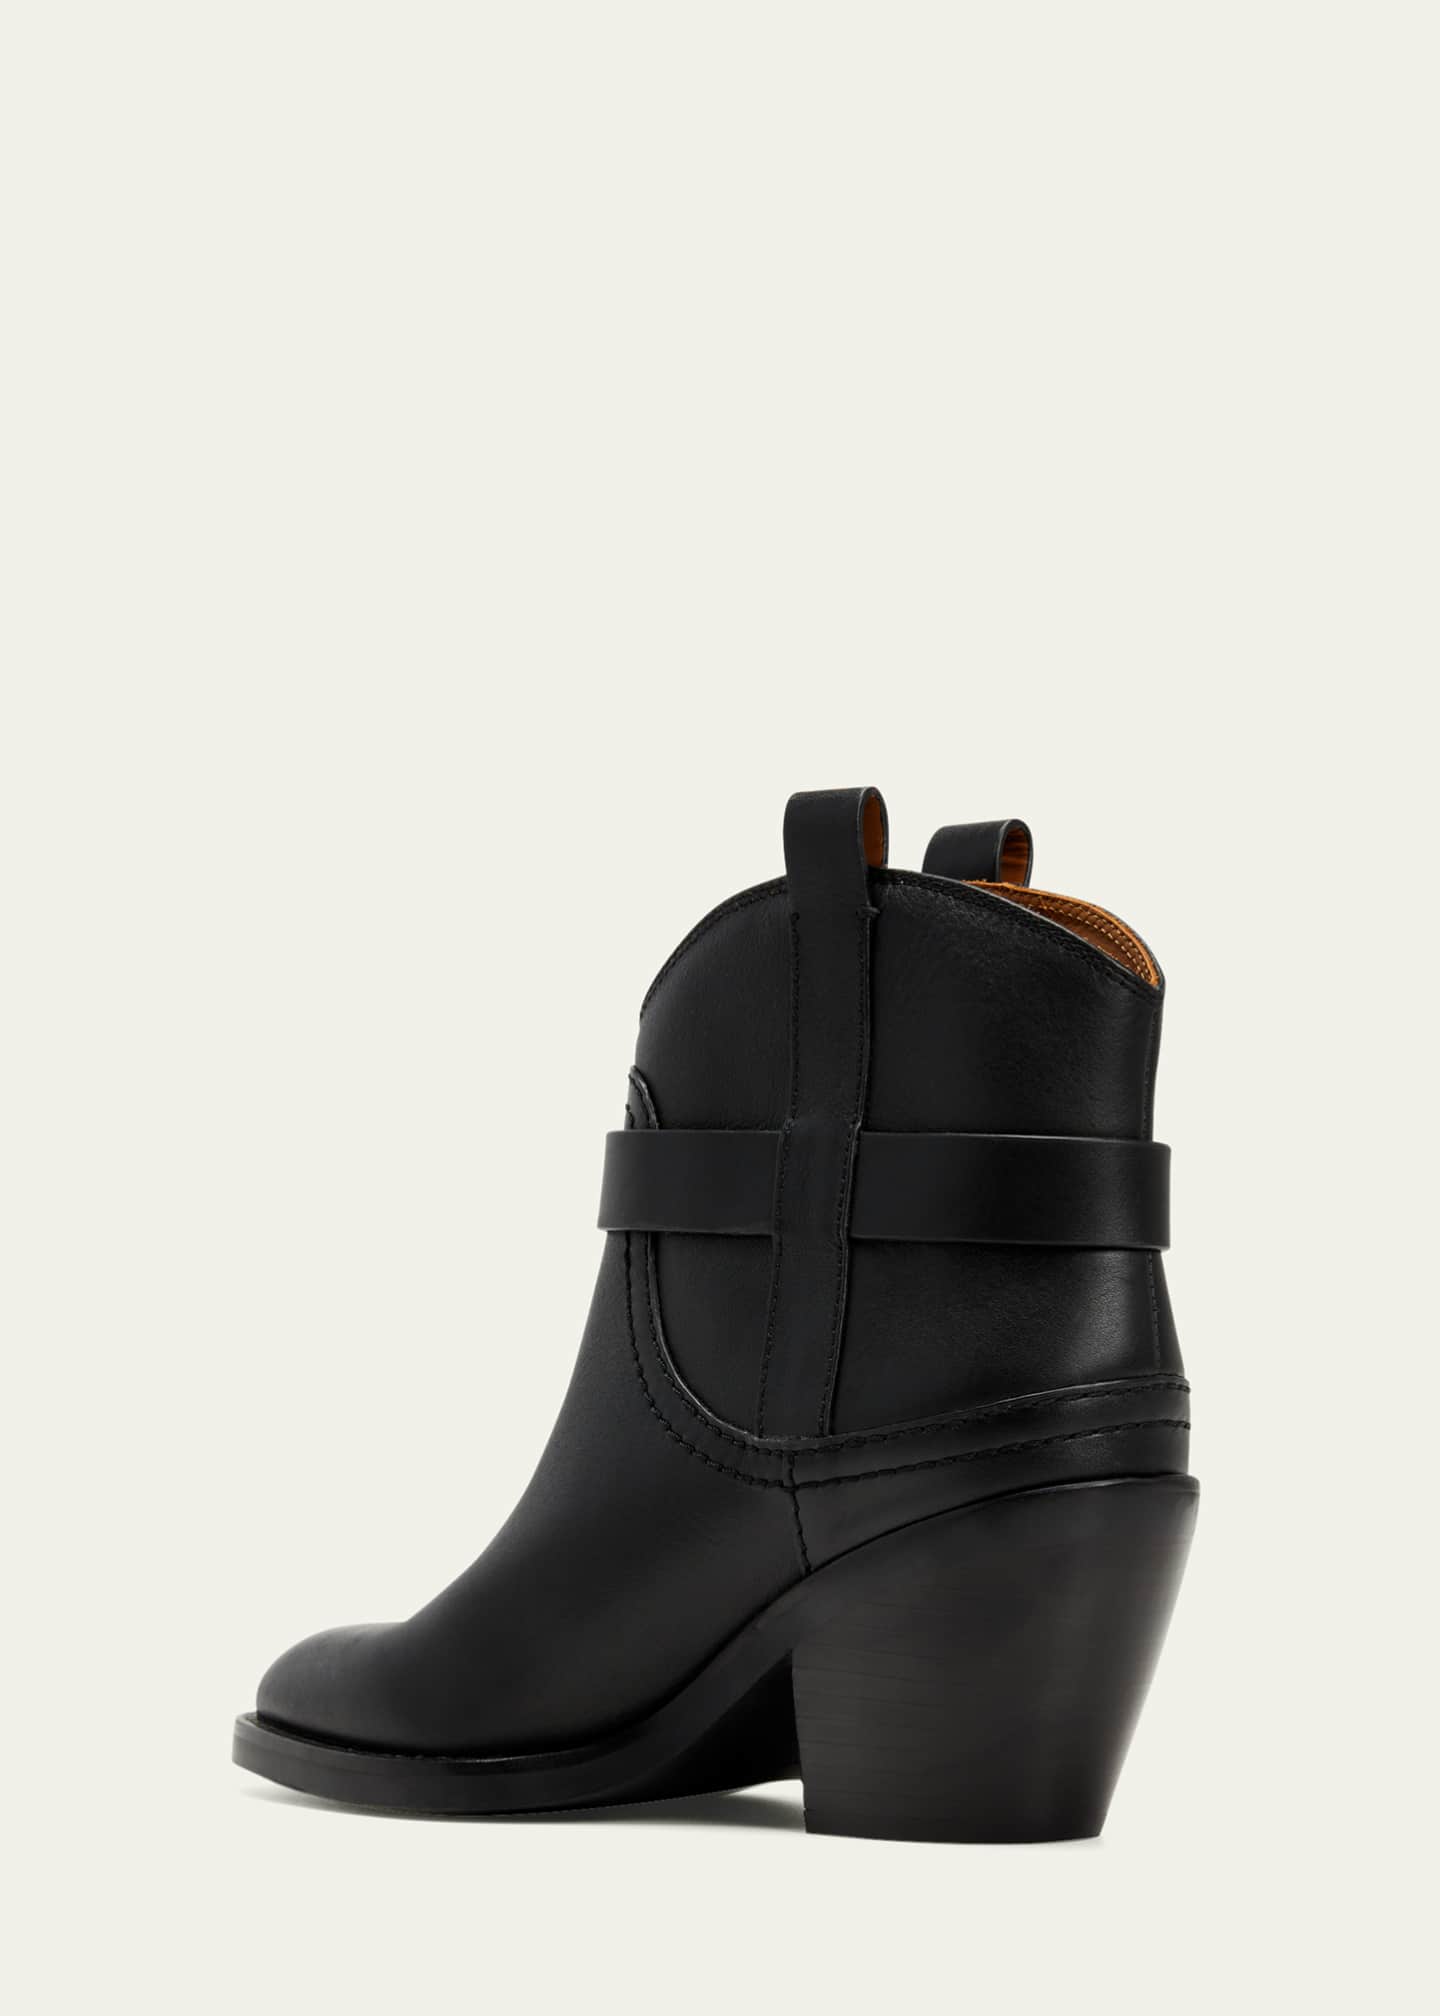 See by Chloe Hana Leather Harness Ankle Boots - Bergdorf Goodman